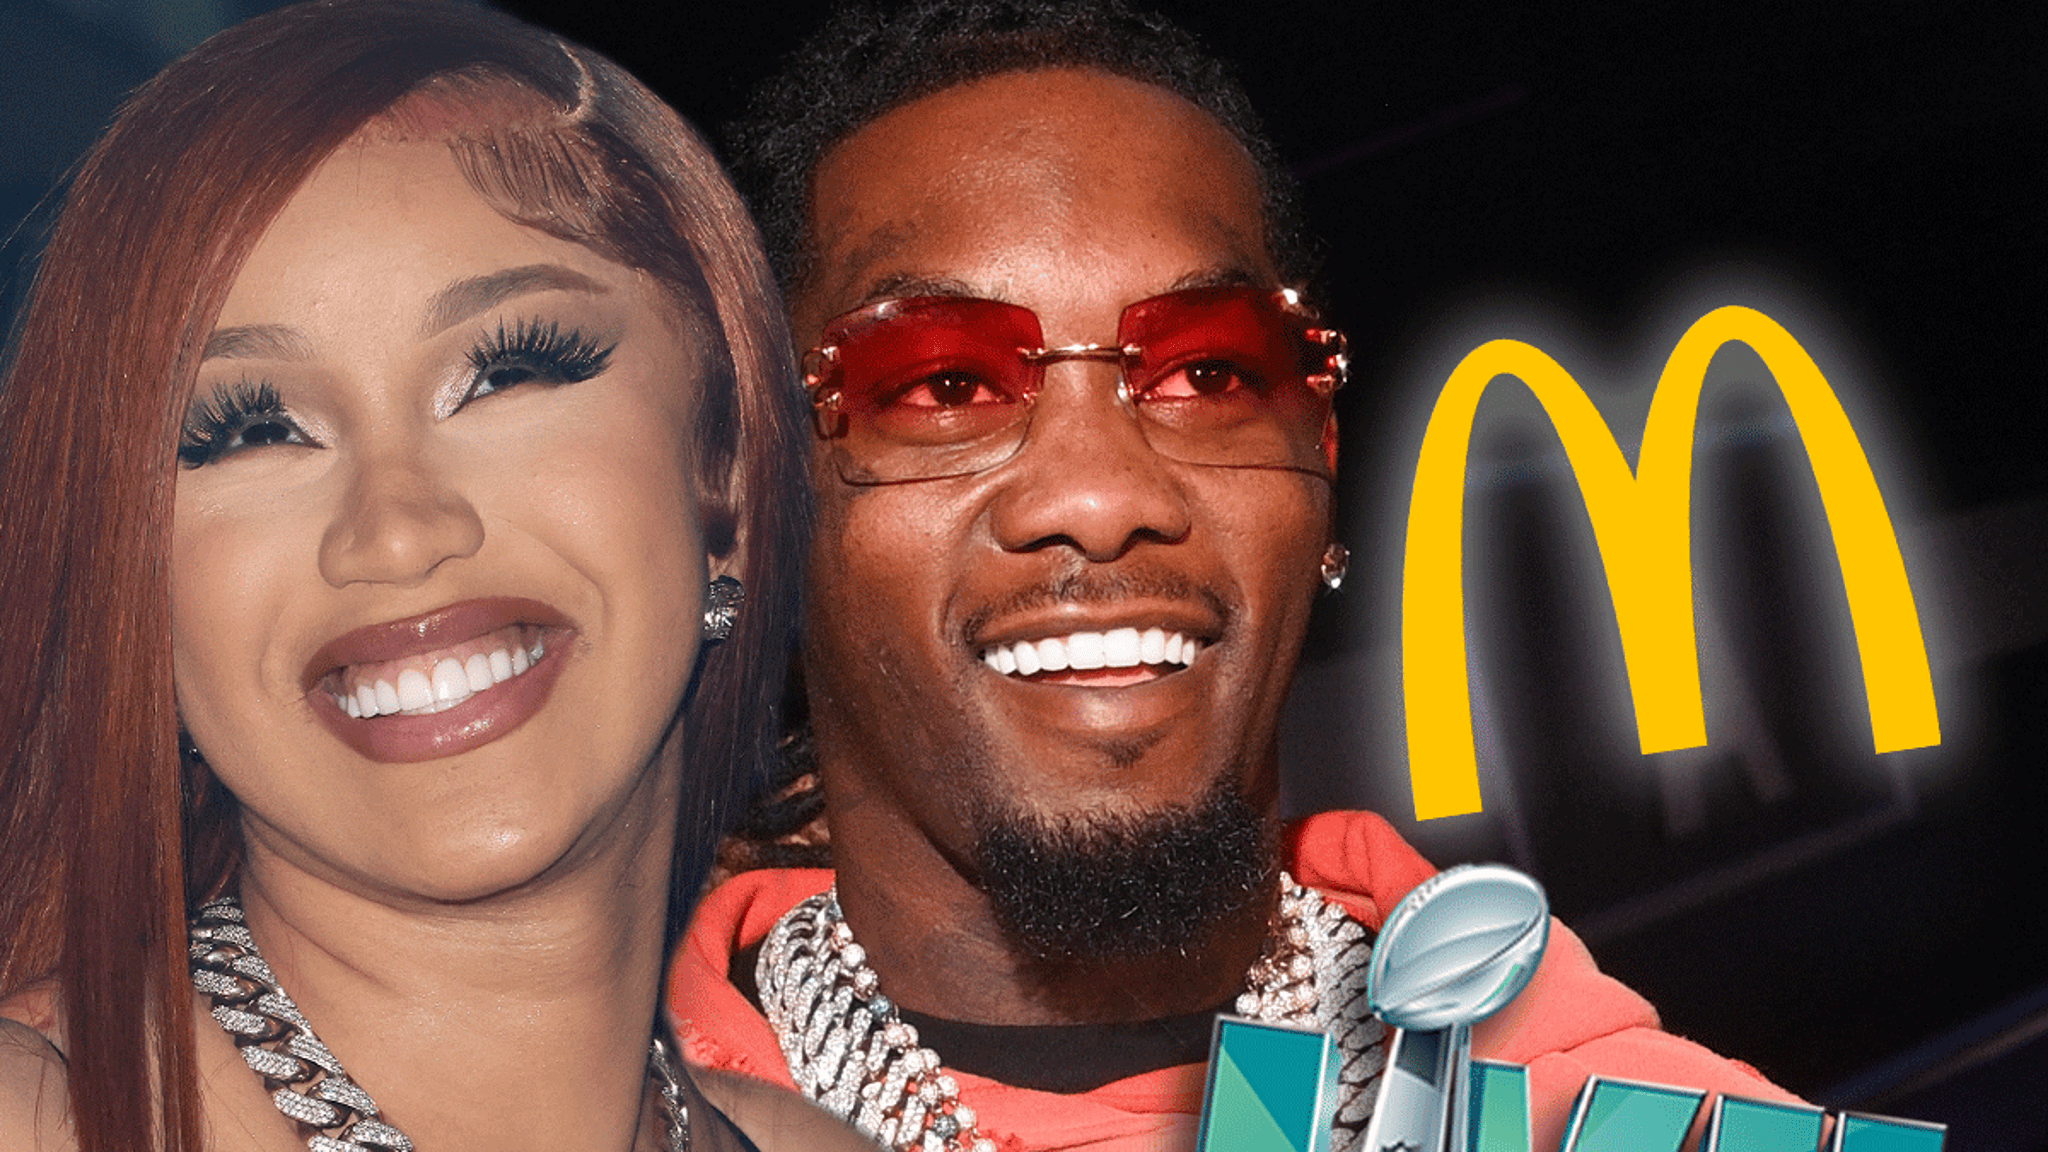 Cardi B and Offset Shoot Valentine's Day-Themed McDonald's Super Bowl Ad #CardiB